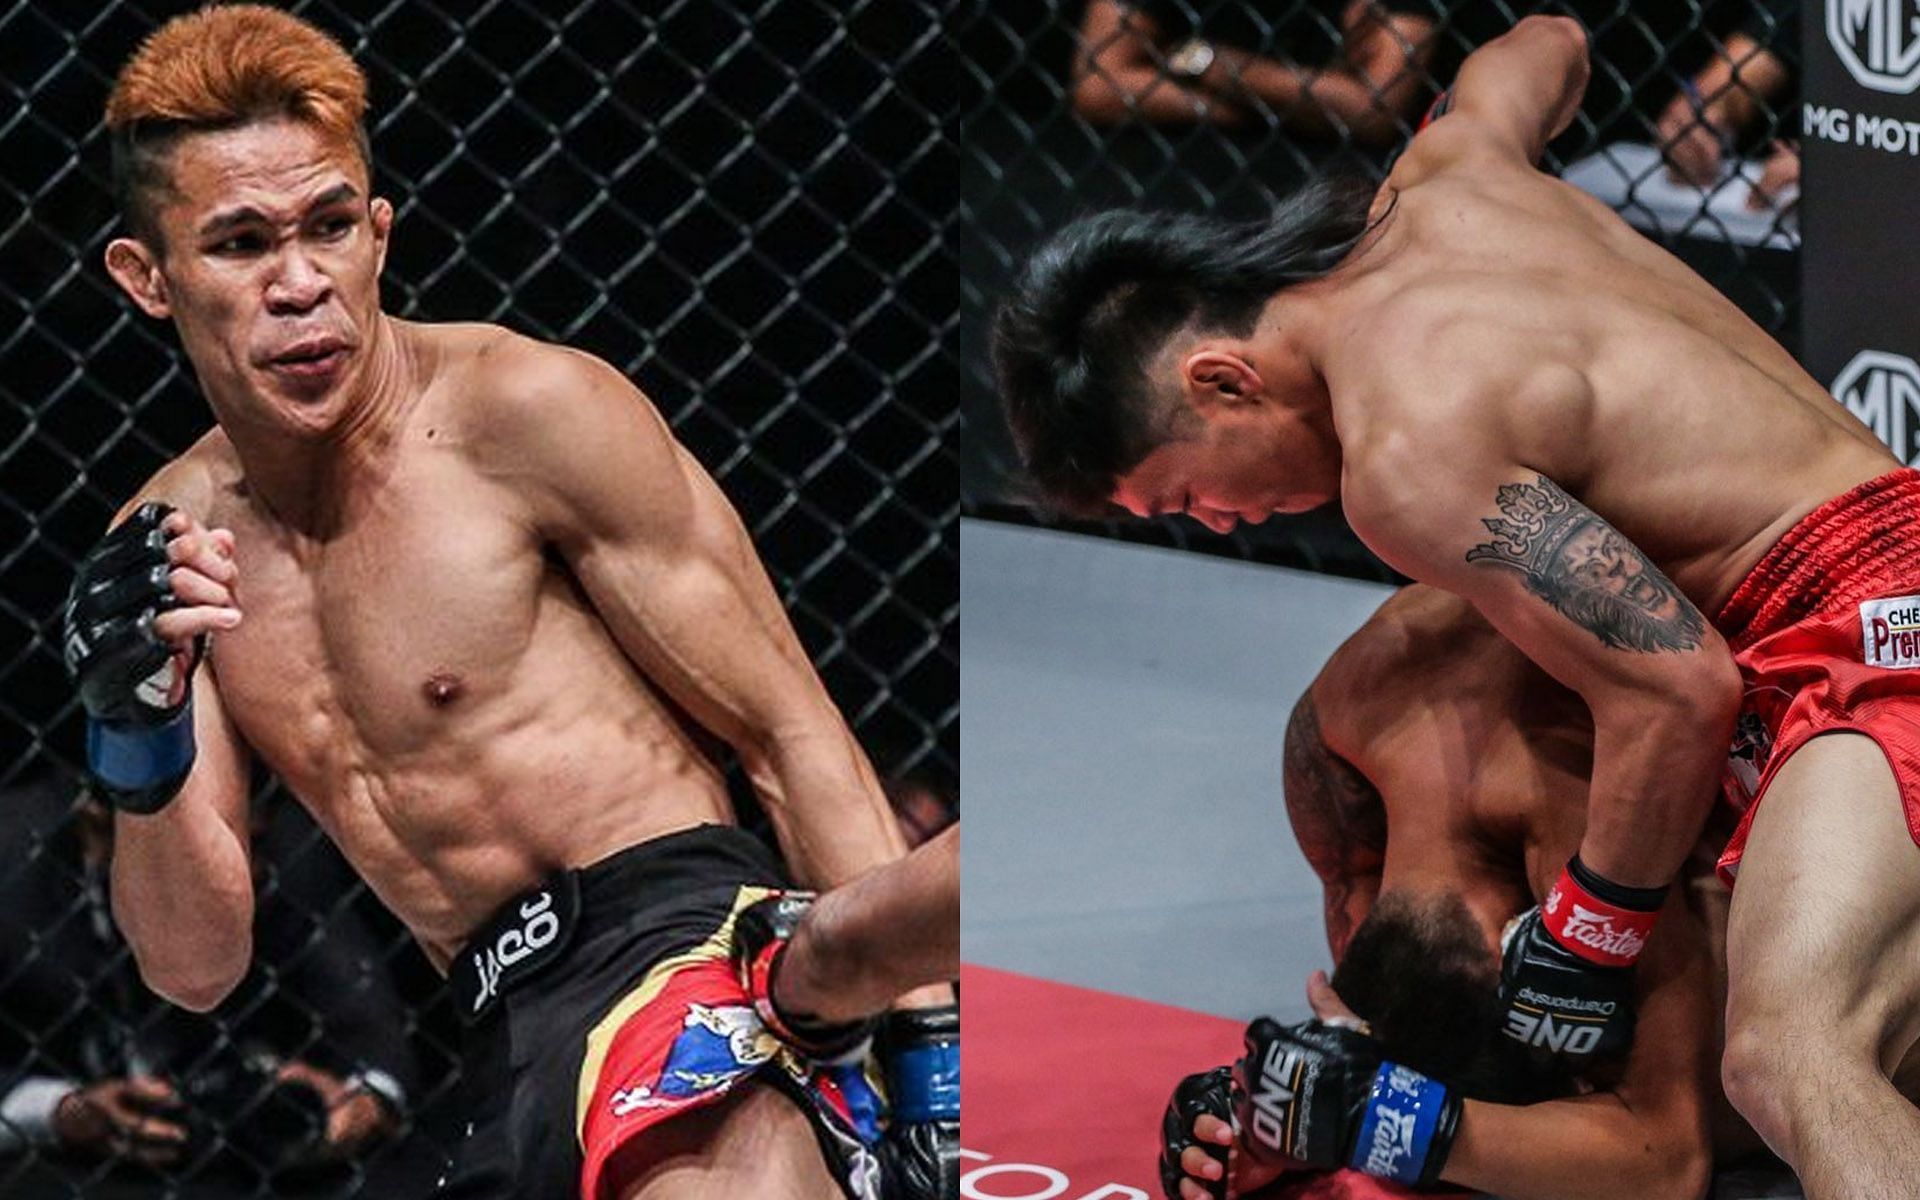 Jeremy Miado (L) is known for his strikes, and Lito Adiwang (R) believes he should worry about the ground aspect of their game. [Photos: ONE Championship]